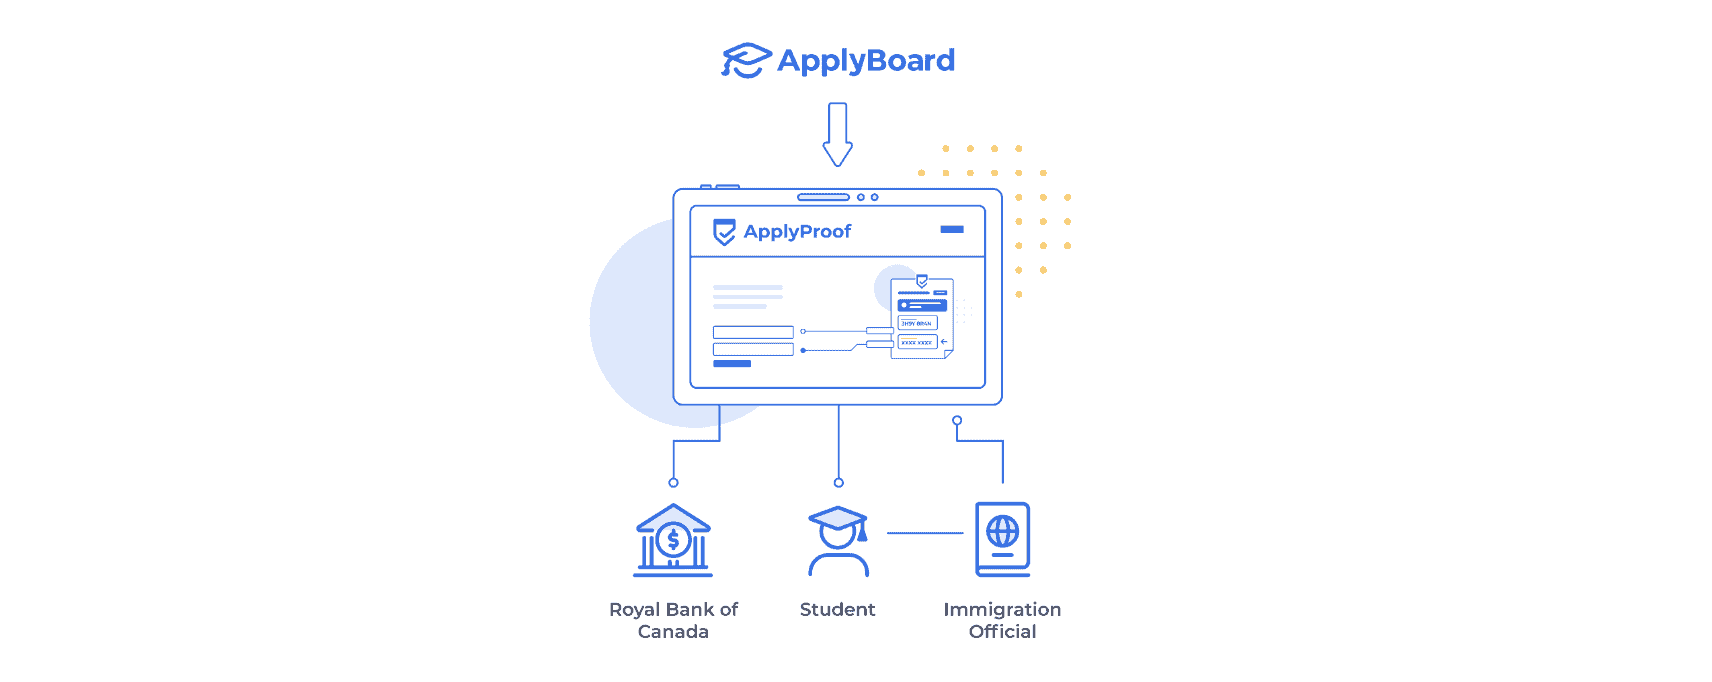 An illustration of our RBC and ApplyBoard team up using ApplyProof demonstrated through a flow chart. 